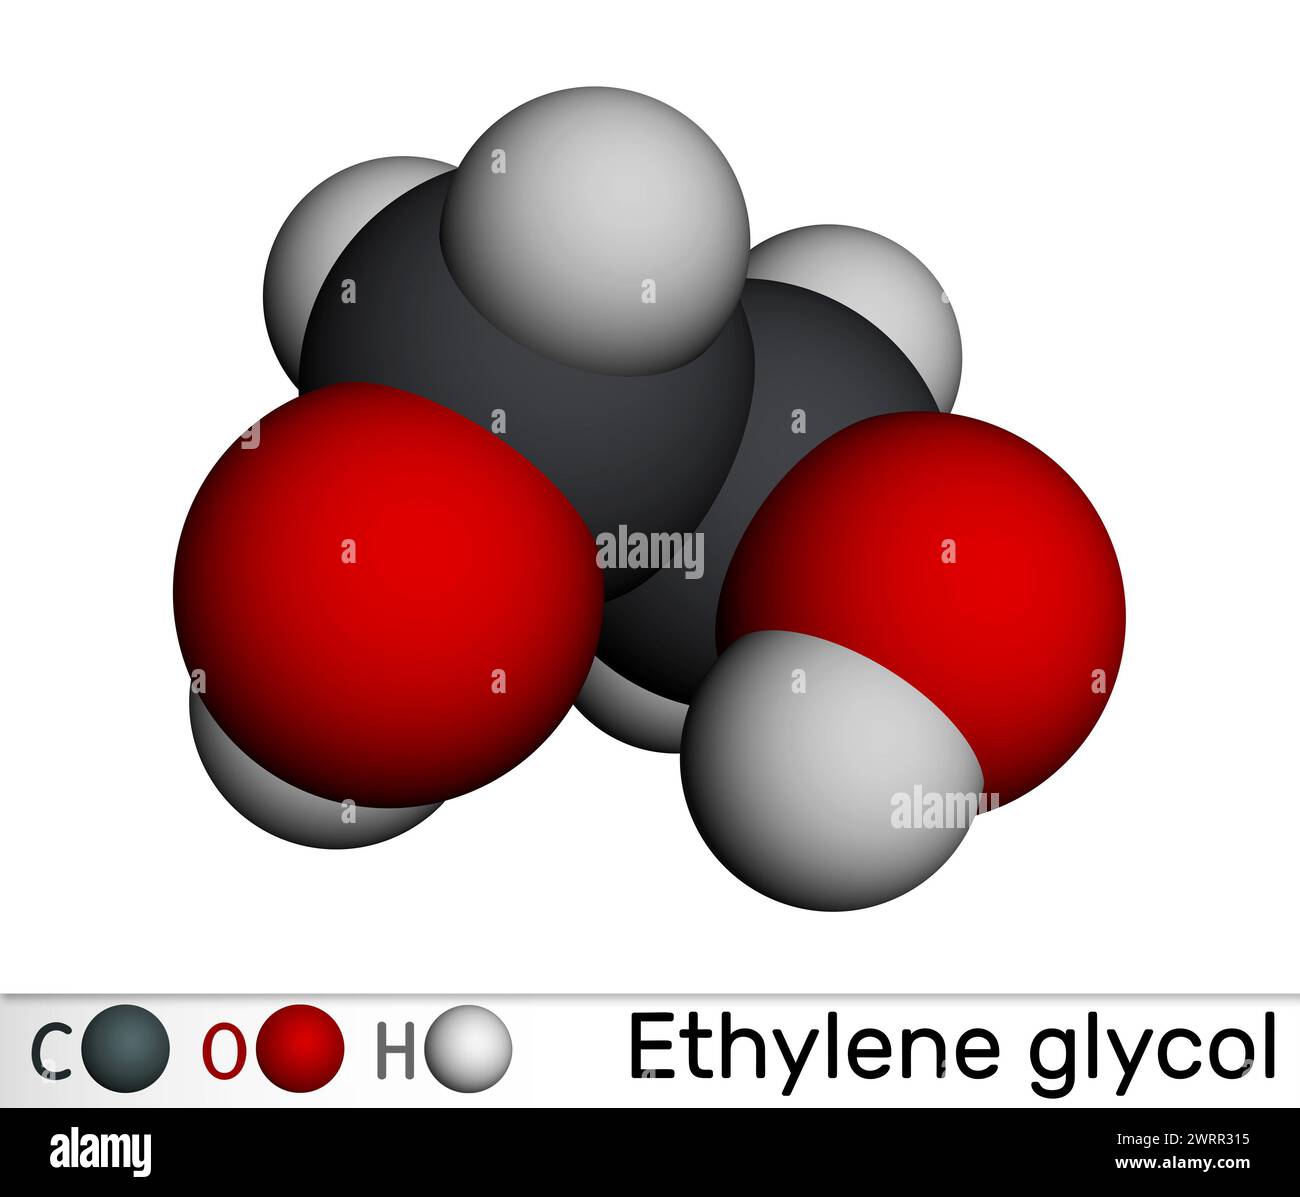 Ethylene glycol, diol molecule. Used for manufacture of polyester fibers and for antifreeze formulations. Molecular model. 3D rendering. Illustration Stock Photo